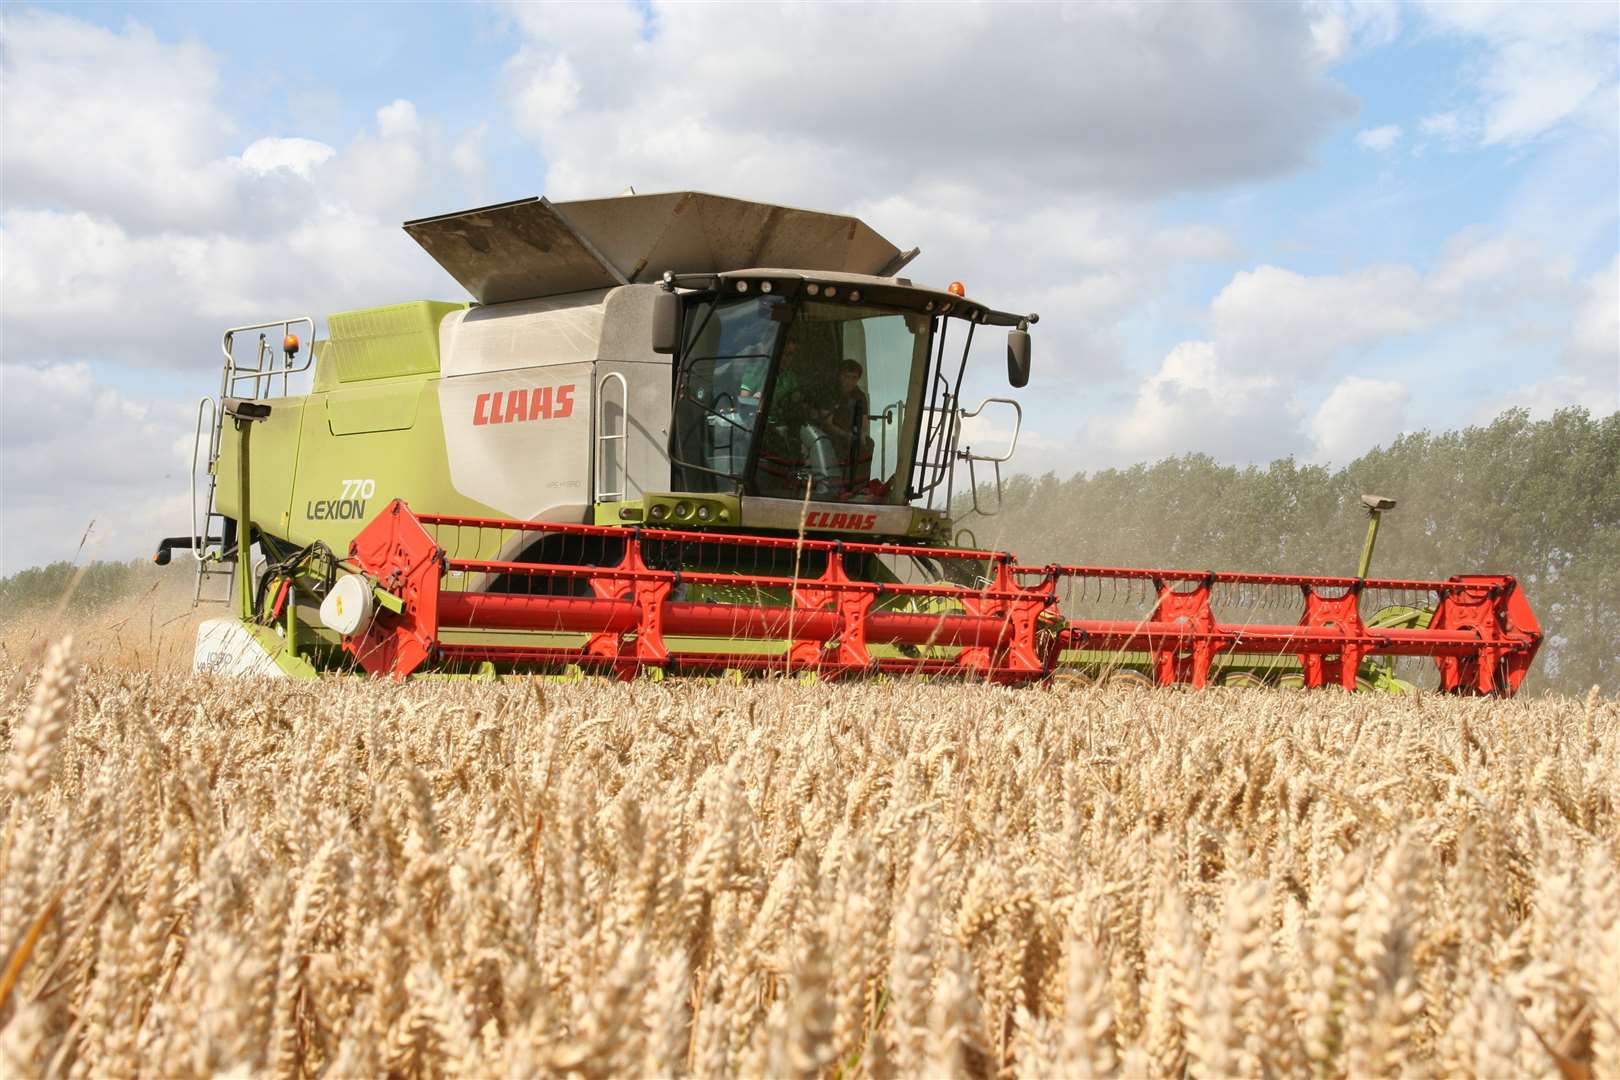 It has been a difficult year for arable farmers in Kent